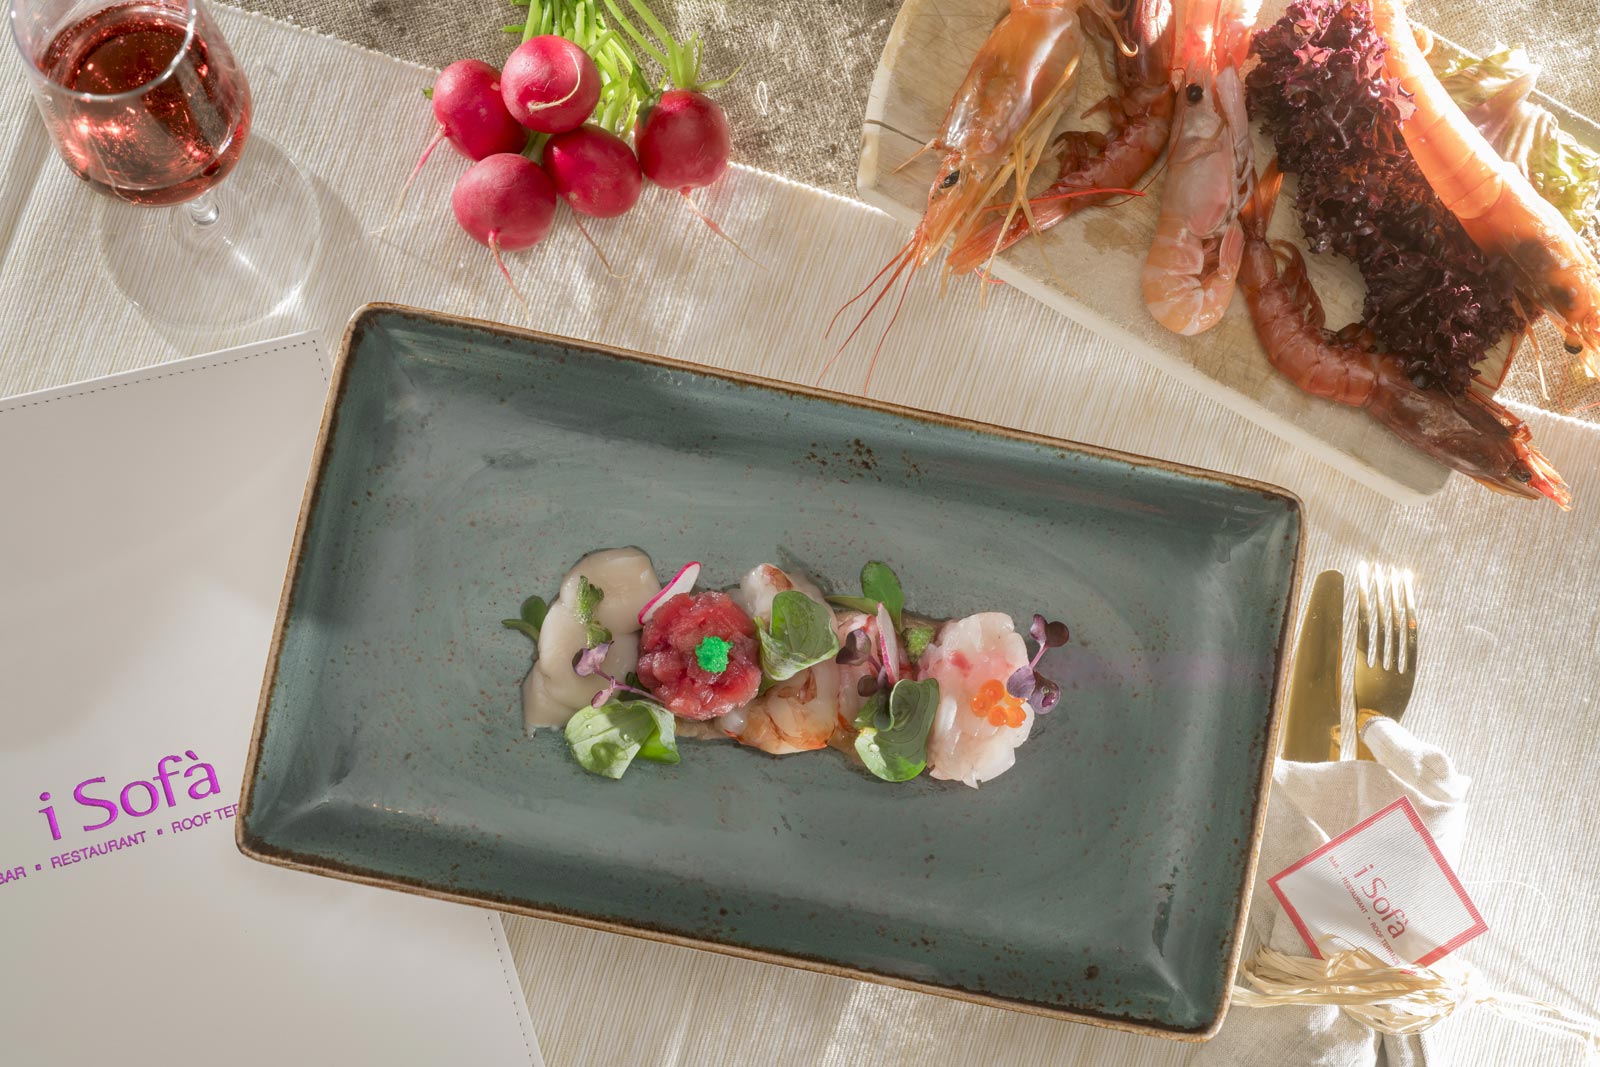 Raw seafood mirror with diced salmon, scallop carpaccio, red prawn (*) Norway lobster (*), tartare of sea bass, tartare of tuna and white prawn with radish chips, oyster leaf, wasabi eggs and salmon eggs